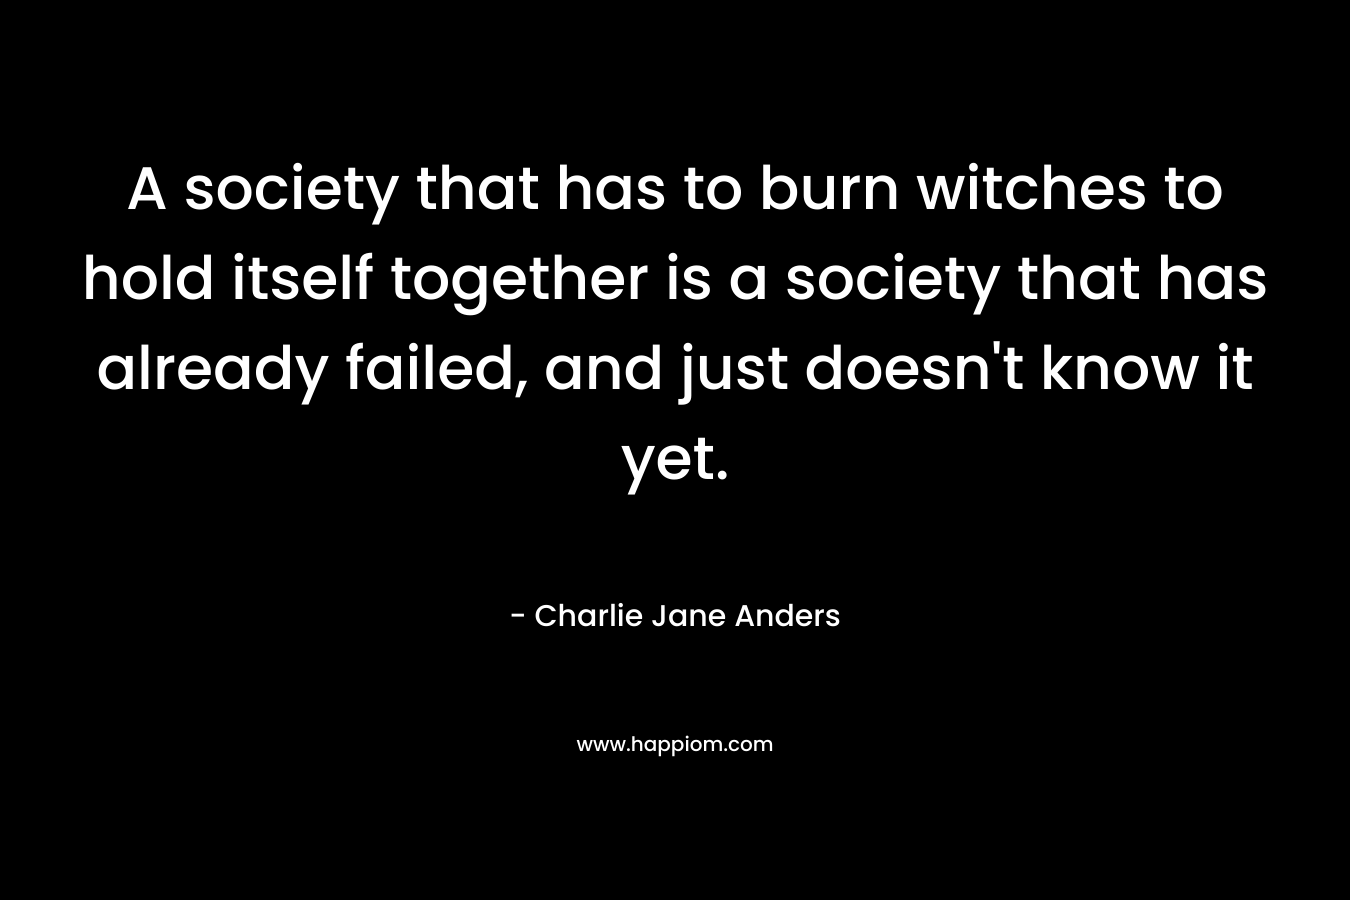 A society that has to burn witches to hold itself together is a society that has already failed, and just doesn’t know it yet. – Charlie Jane Anders